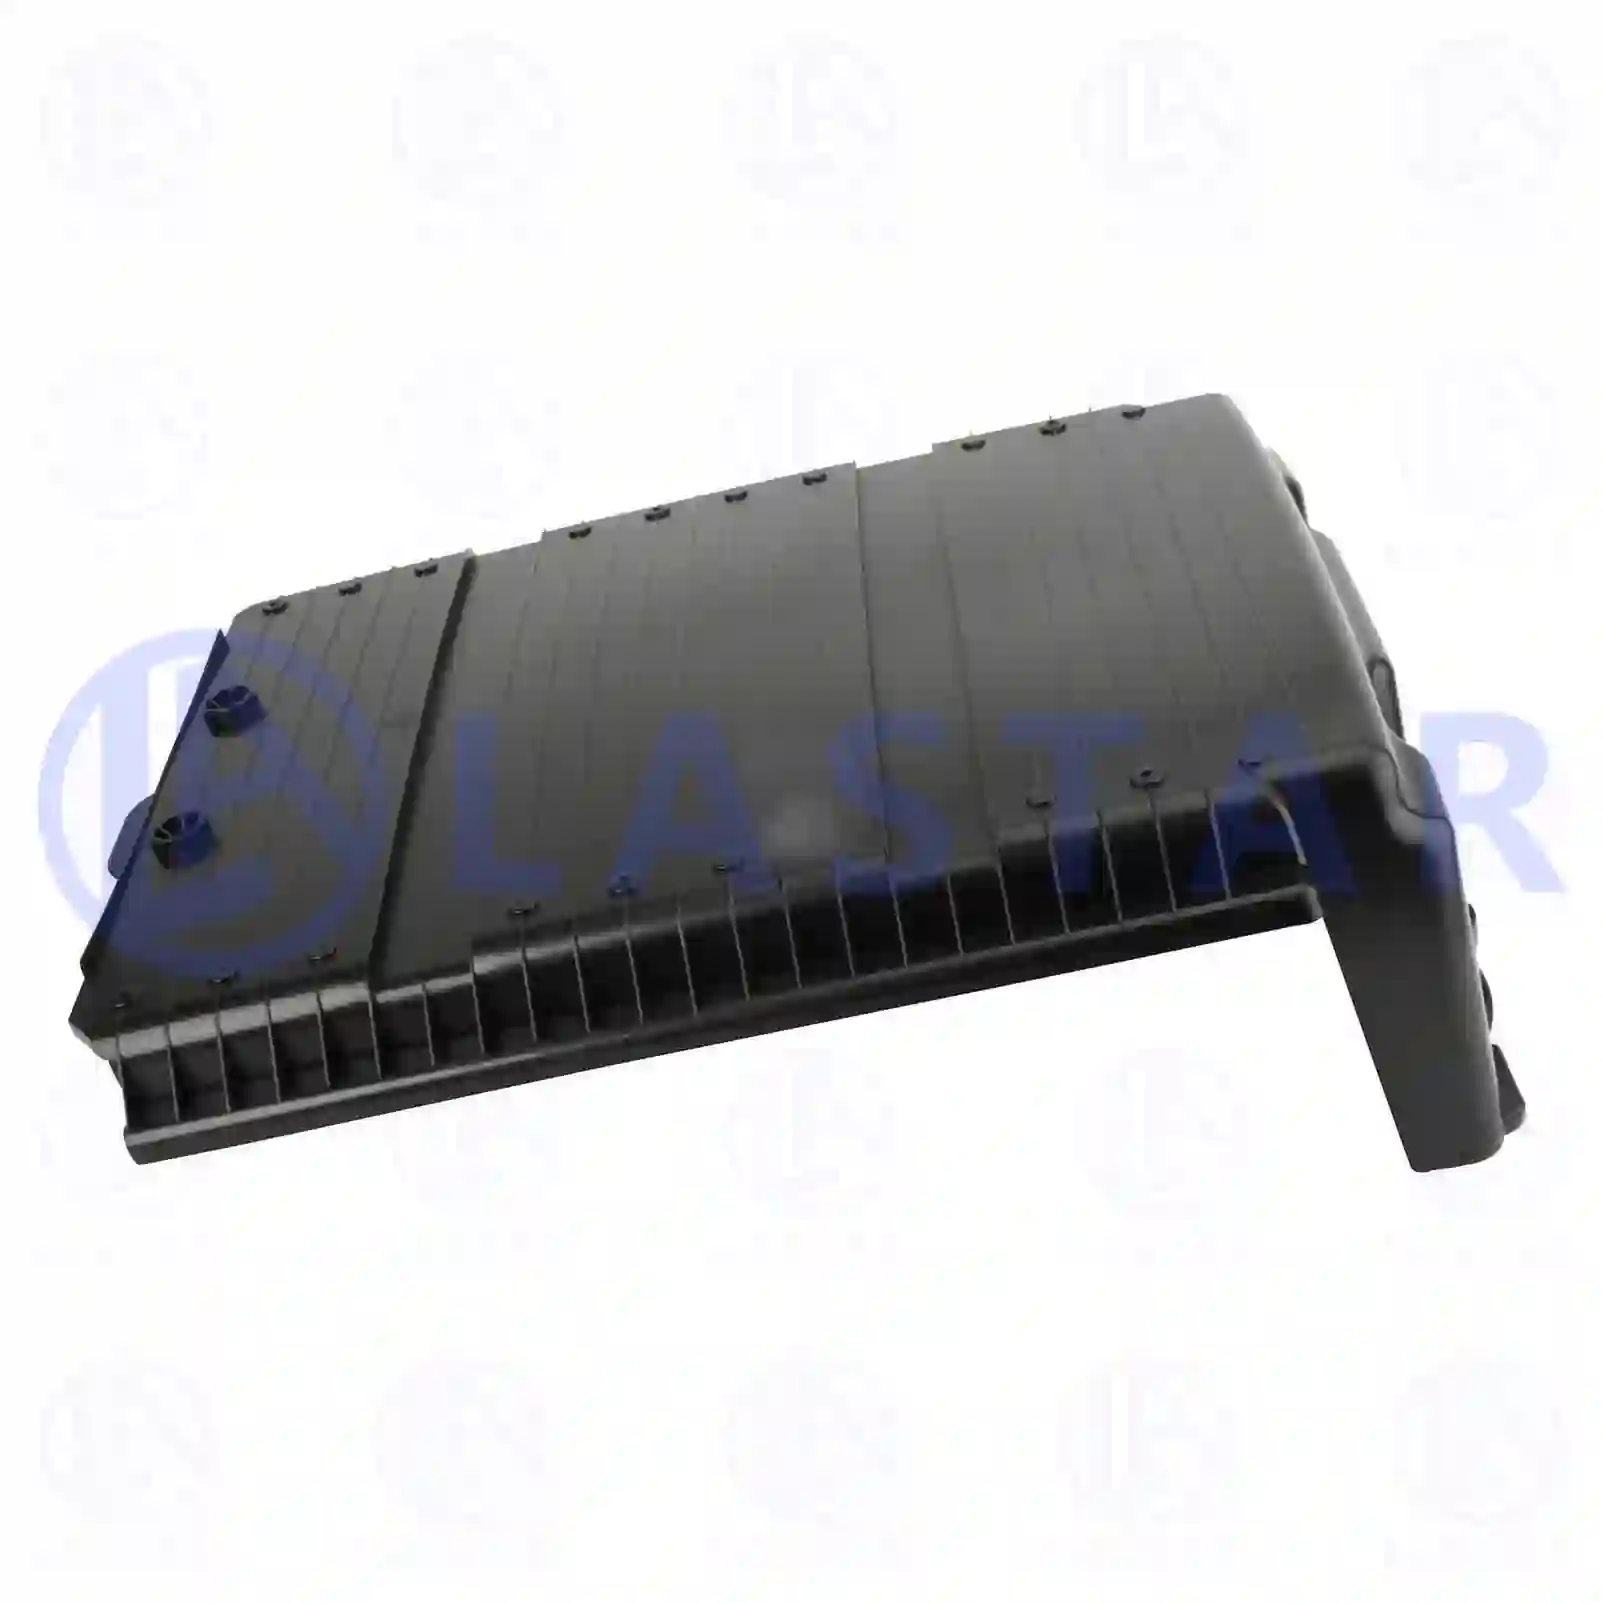 Battery cover, 77712532, 1667885, 1693114, ZG60032-0008 ||  77712532 Lastar Spare Part | Truck Spare Parts, Auotomotive Spare Parts Battery cover, 77712532, 1667885, 1693114, ZG60032-0008 ||  77712532 Lastar Spare Part | Truck Spare Parts, Auotomotive Spare Parts